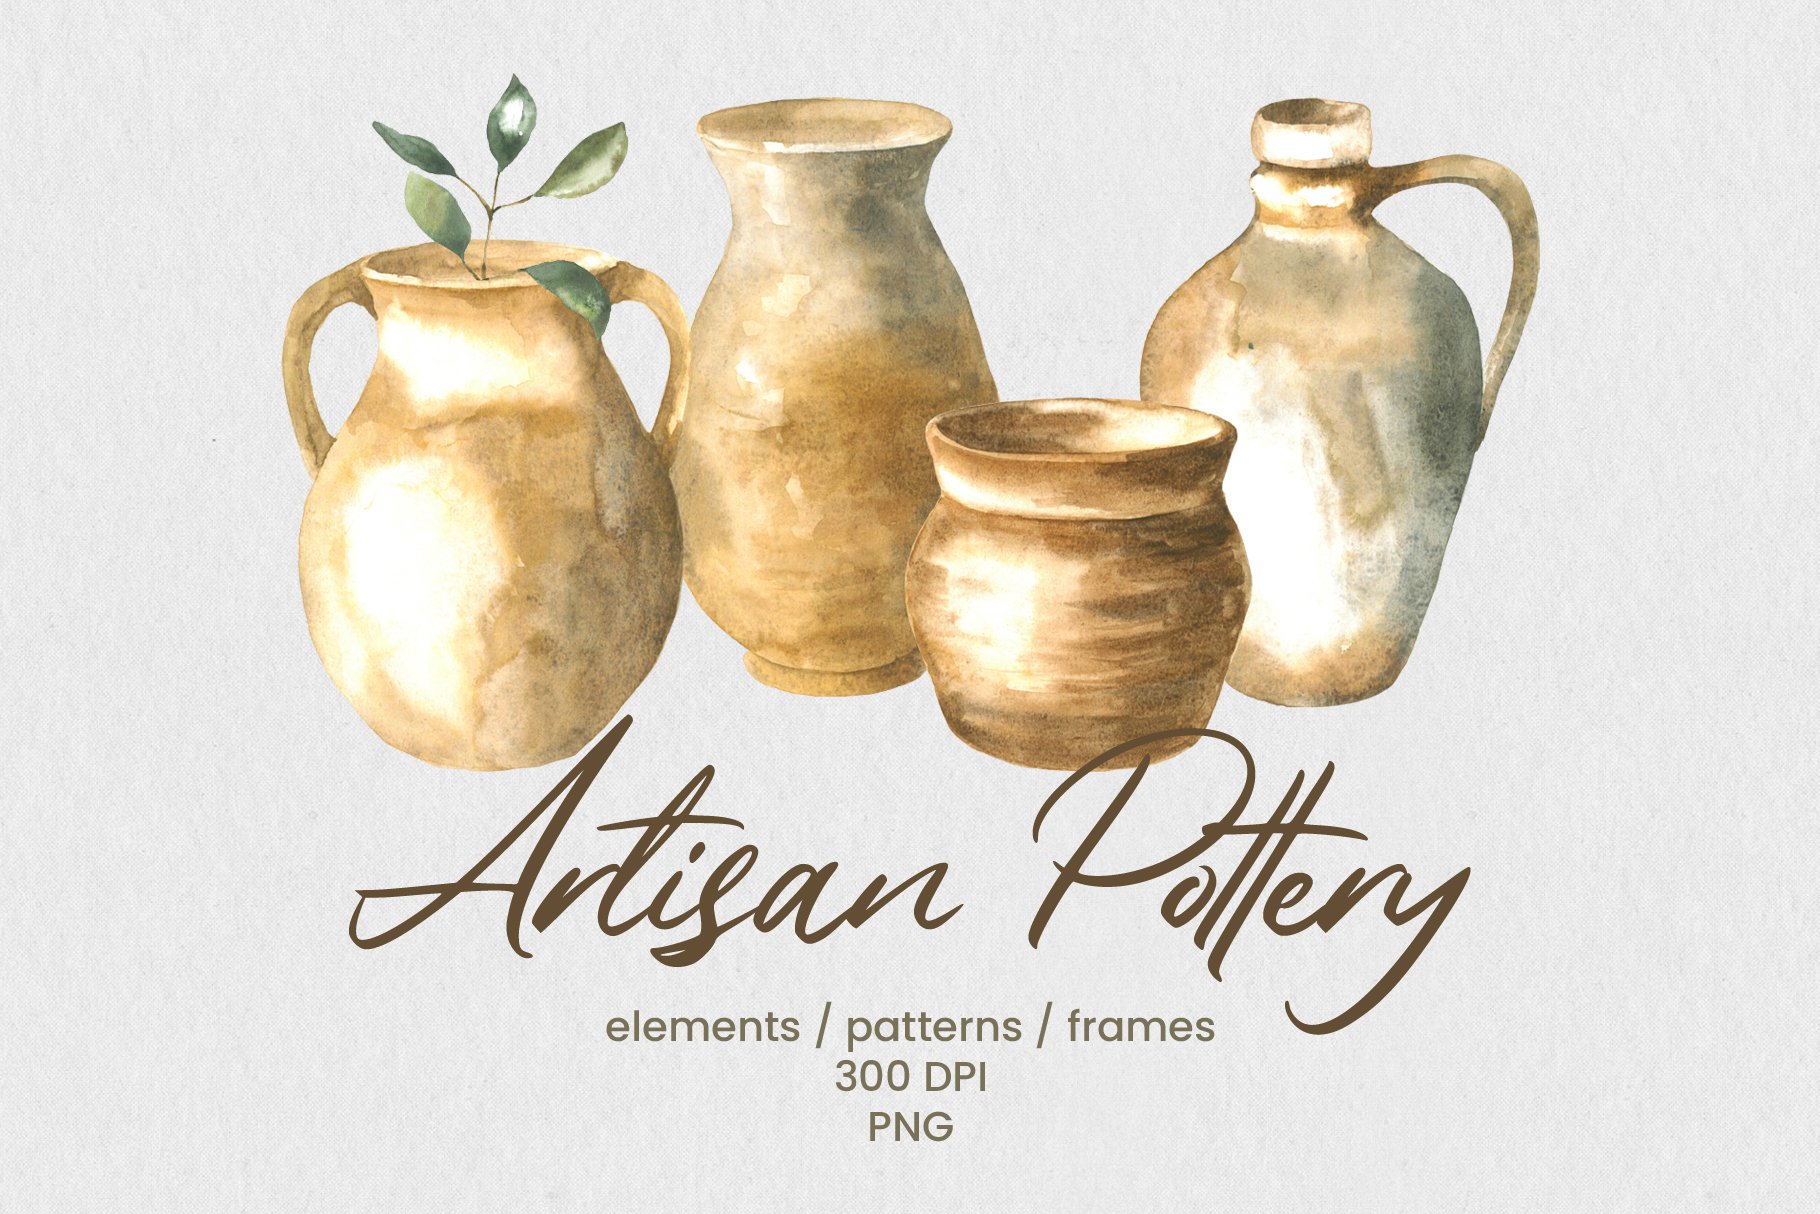 Artisan Pottery Ceramics Collection cover image.